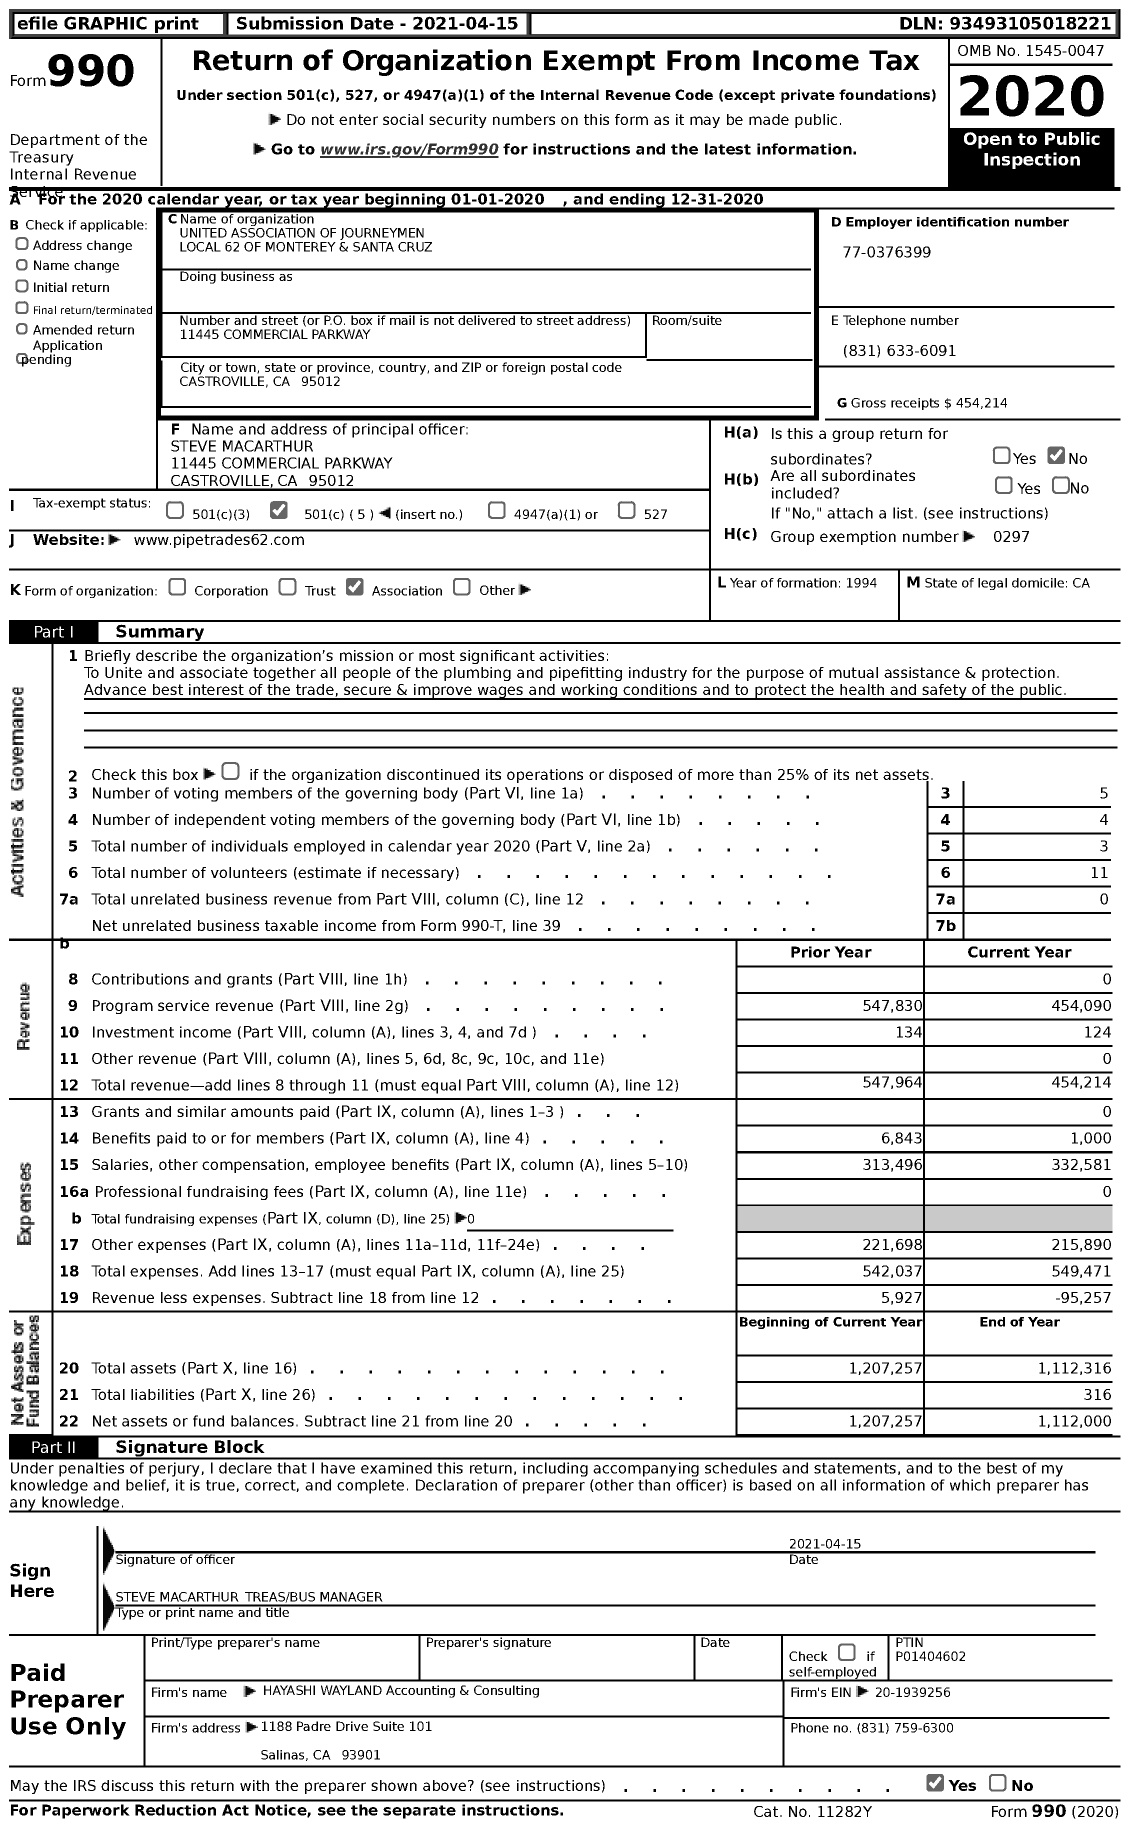 Image of first page of 2020 Form 990 for United Association - Local 62 of Monterey & Santa Cruz